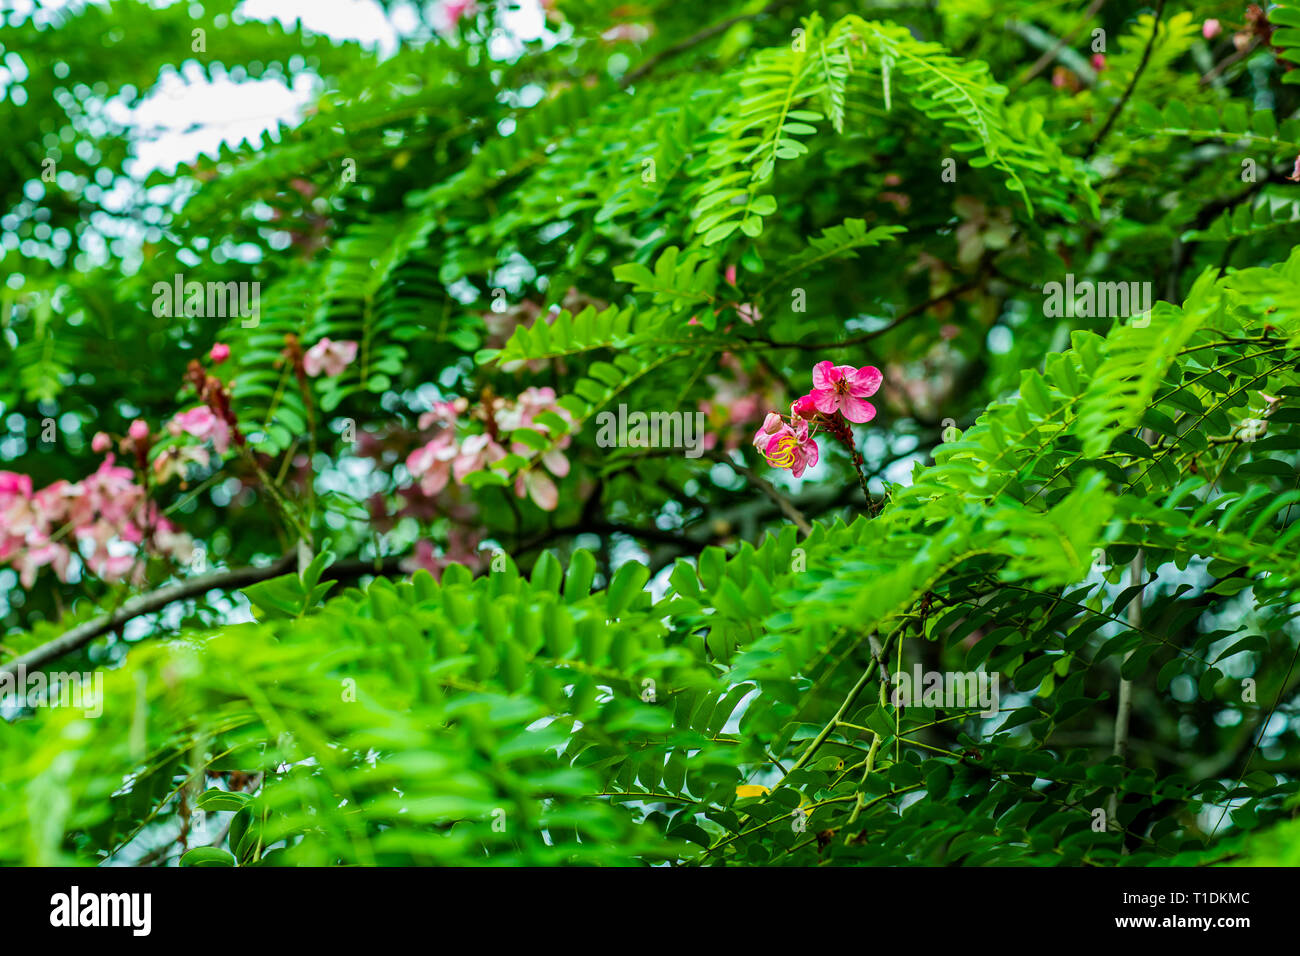 Green leaves of the plant. Pink flower. Bunches of acacia flowers that have a beautiful, pink color. Stock Photo